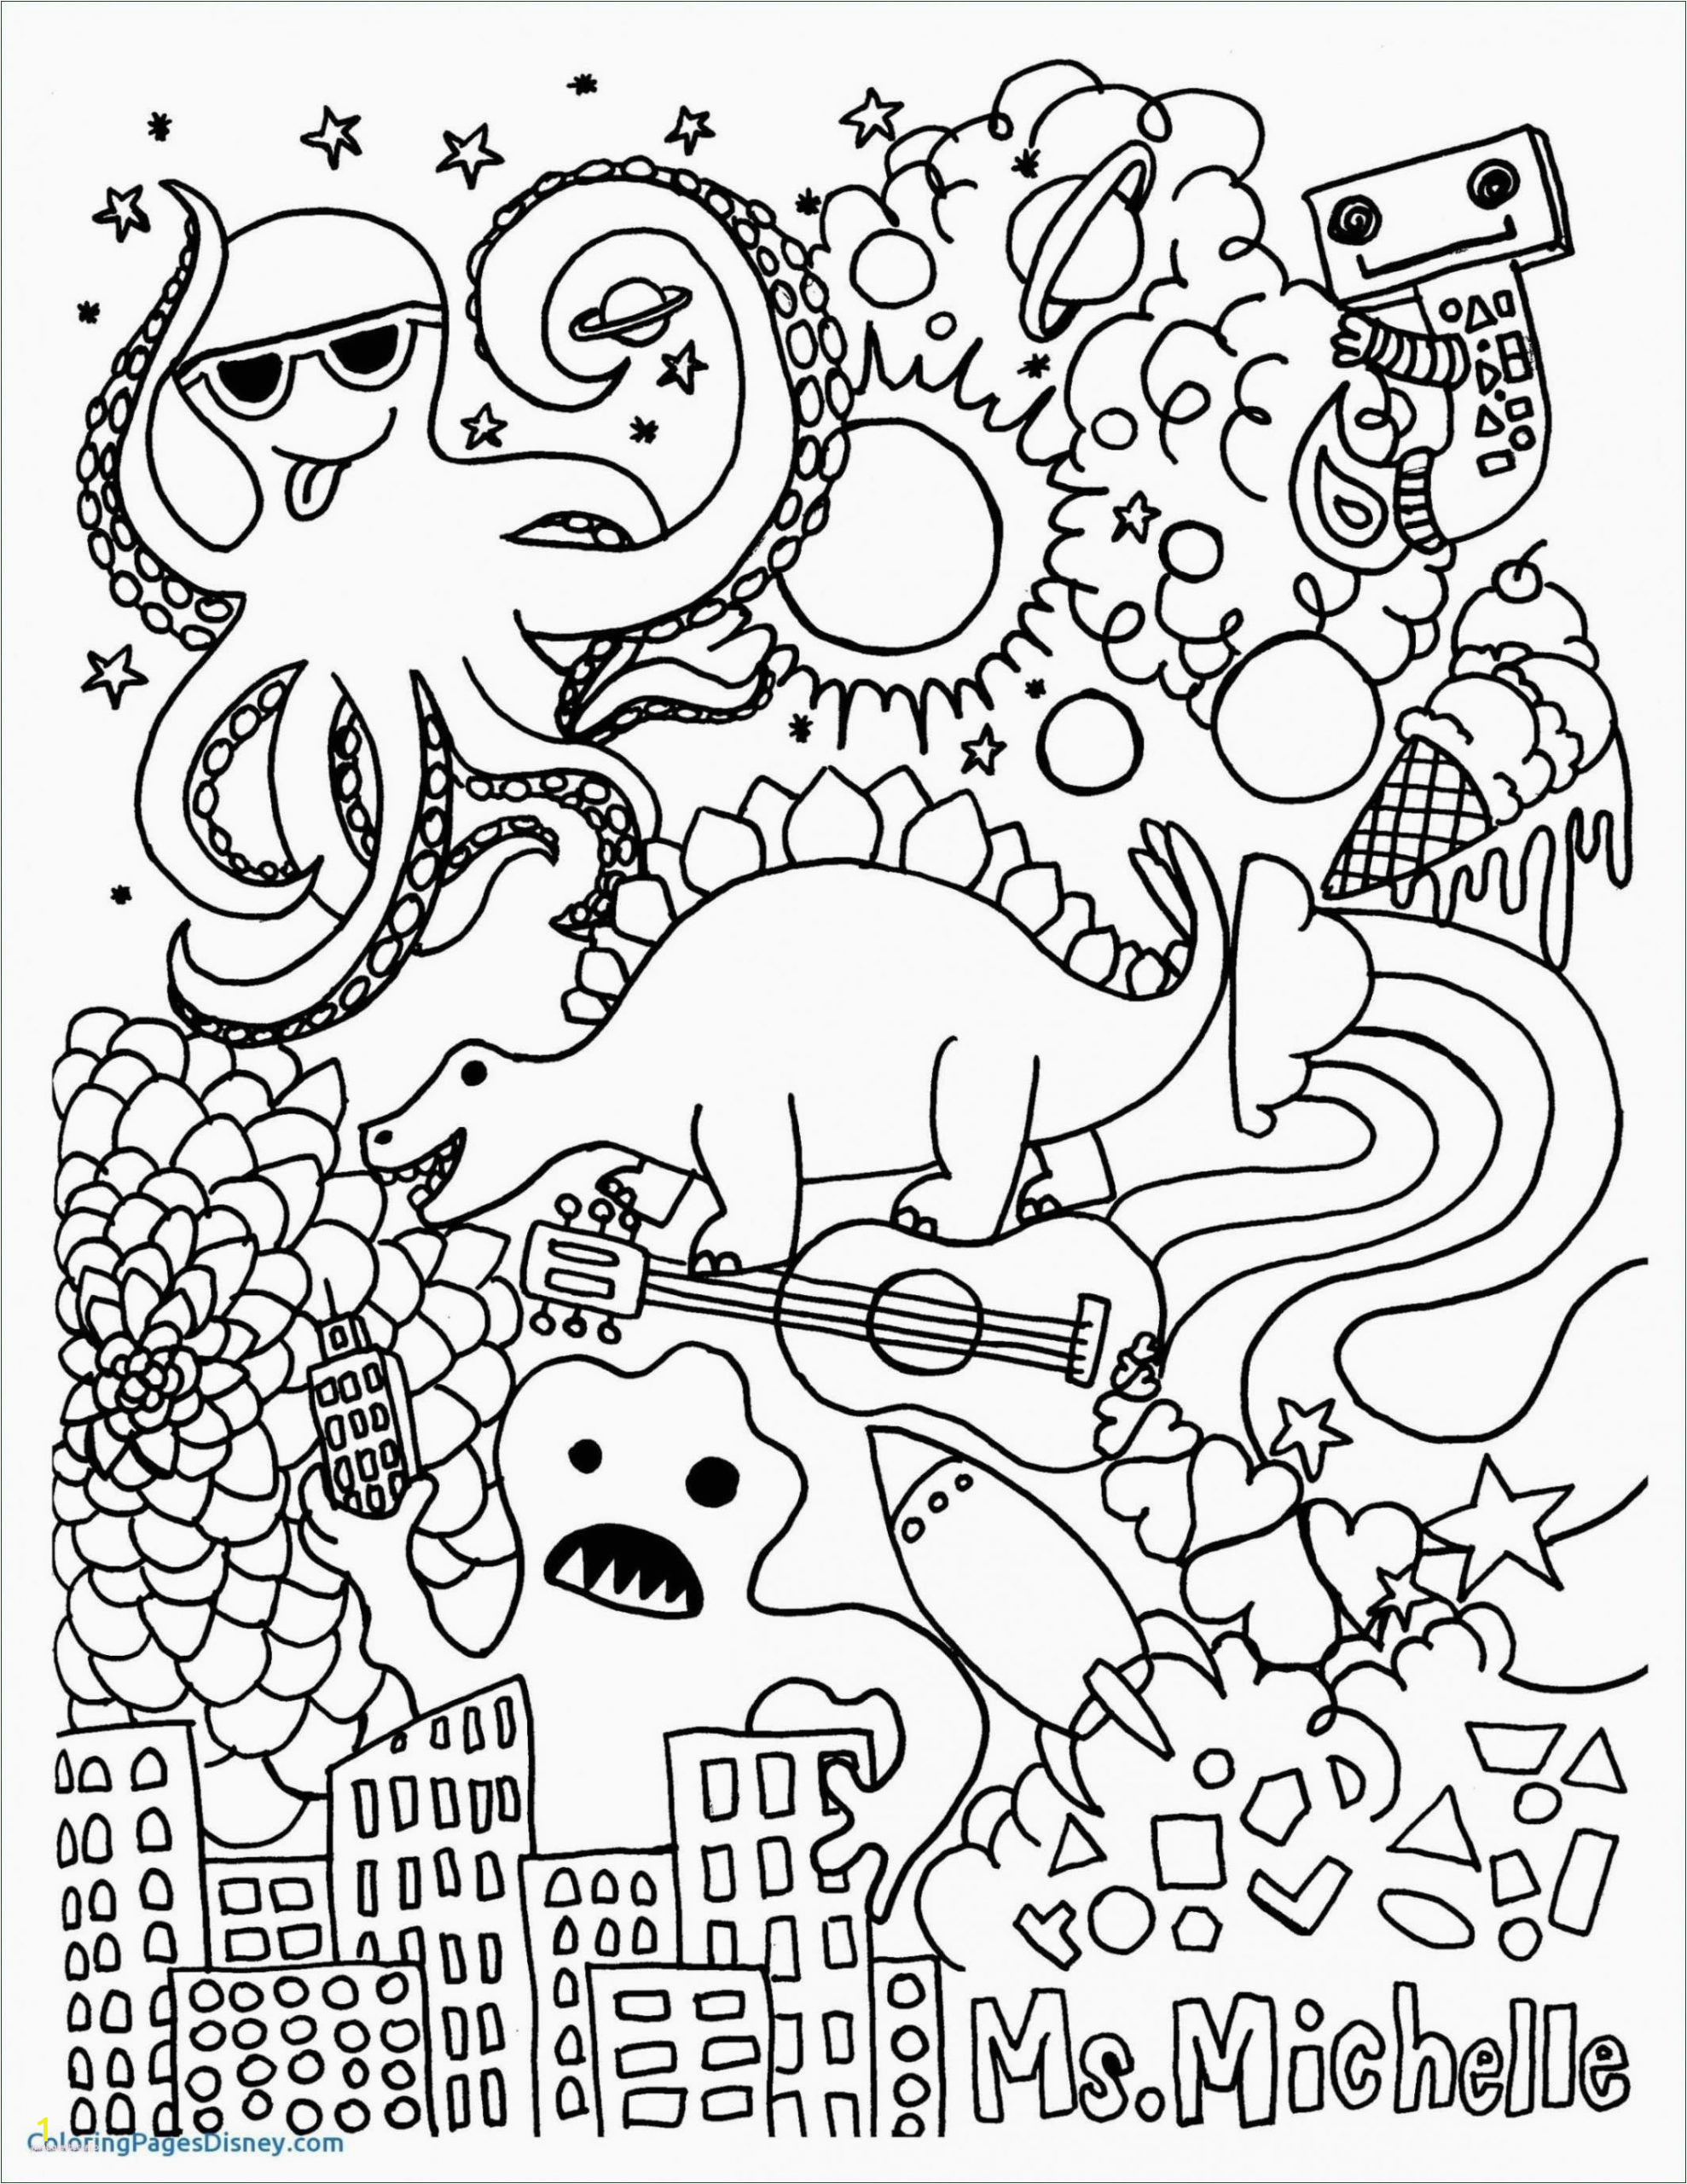 free fairy coloring pages new free printable disney coloring pages for adults latestarticles of free fairy coloring pages